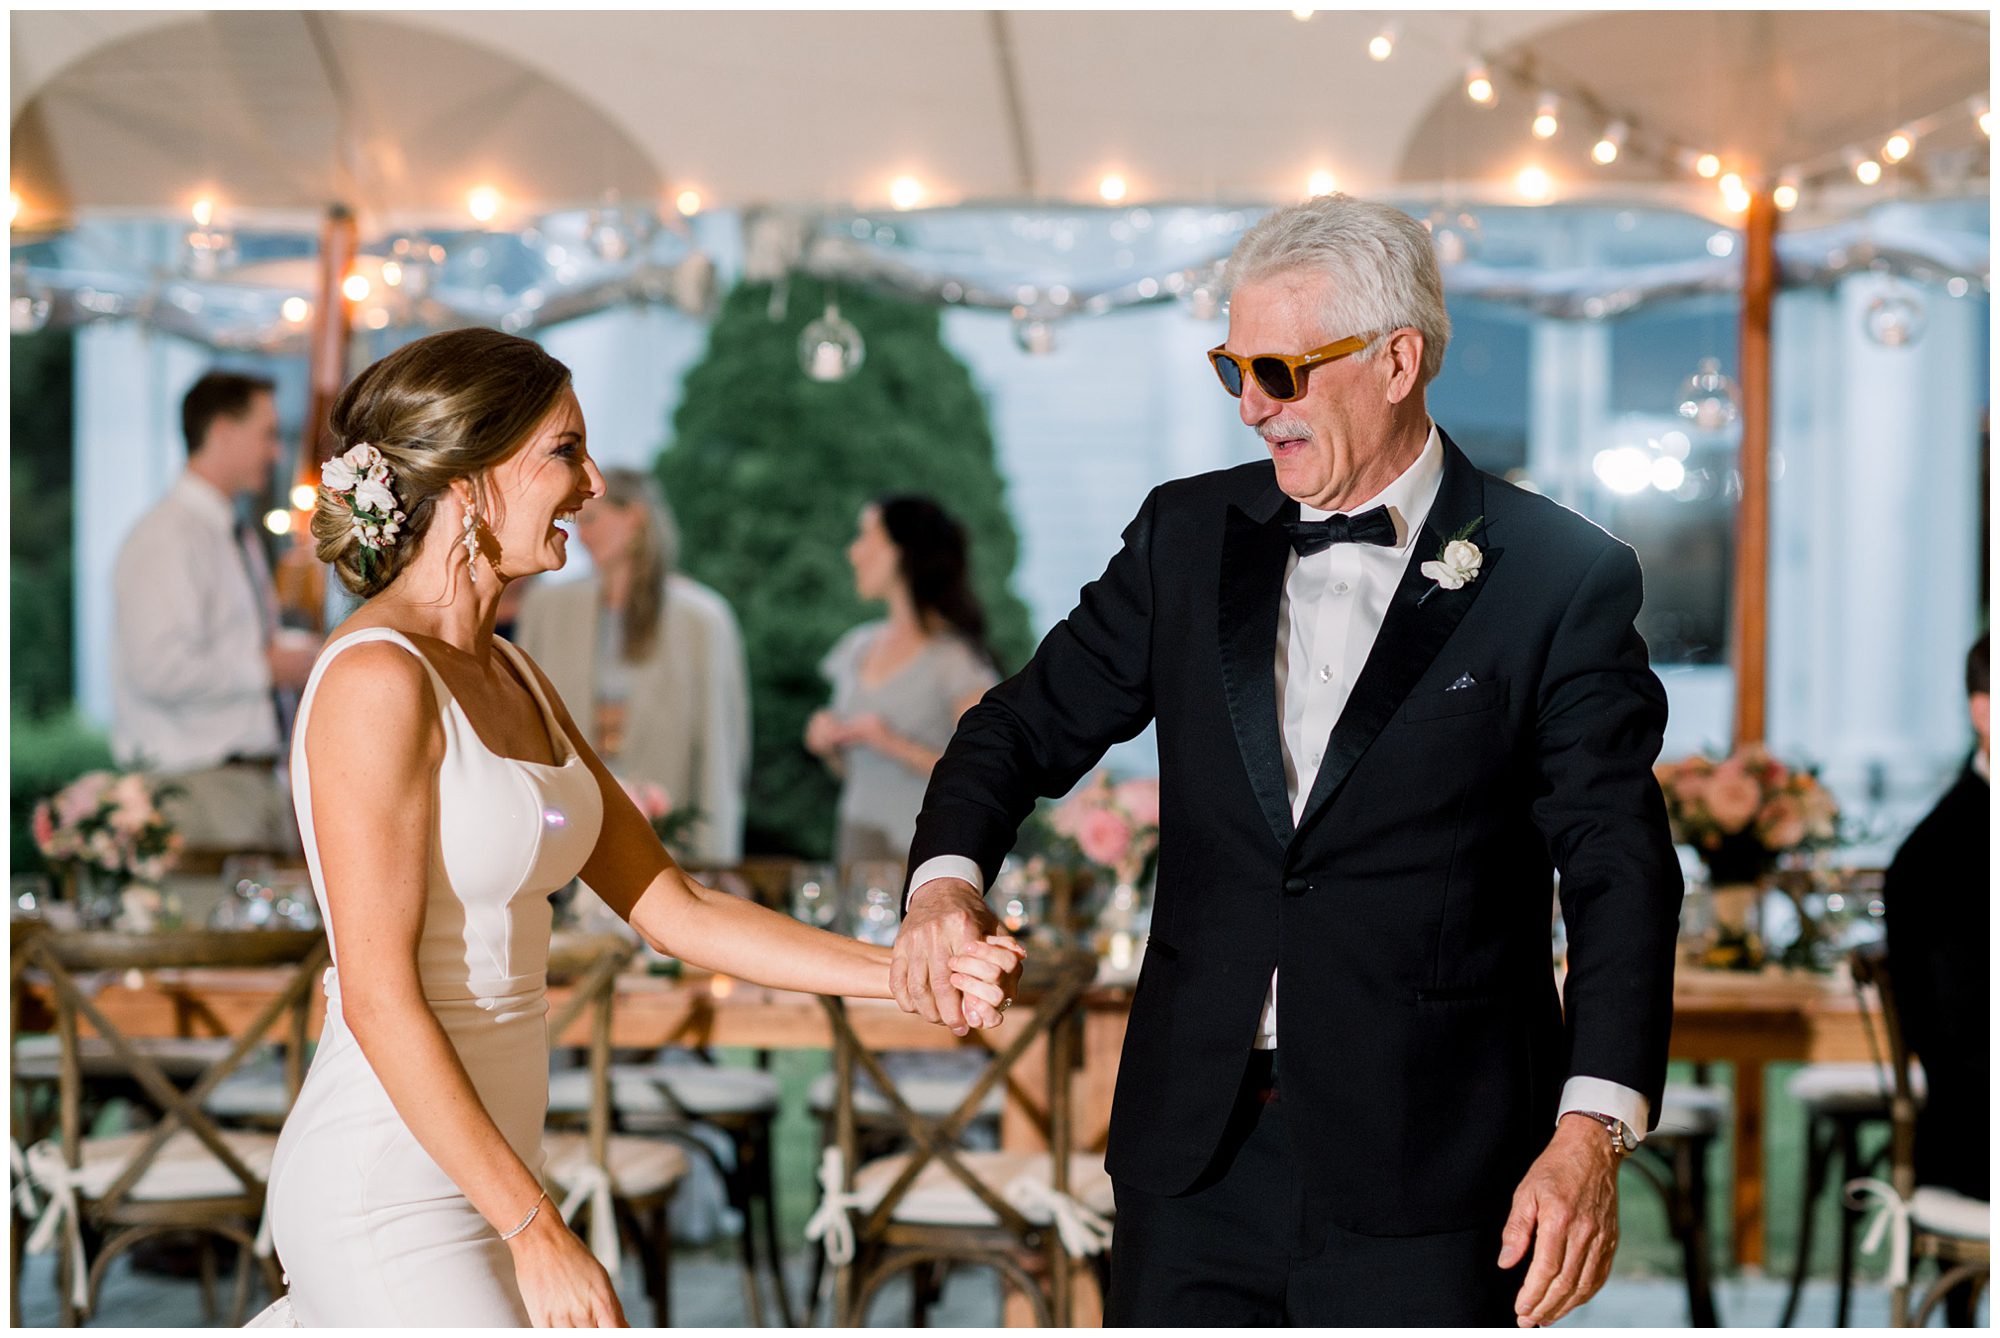 Father daughter dance at Wentworth country Club Wedding.